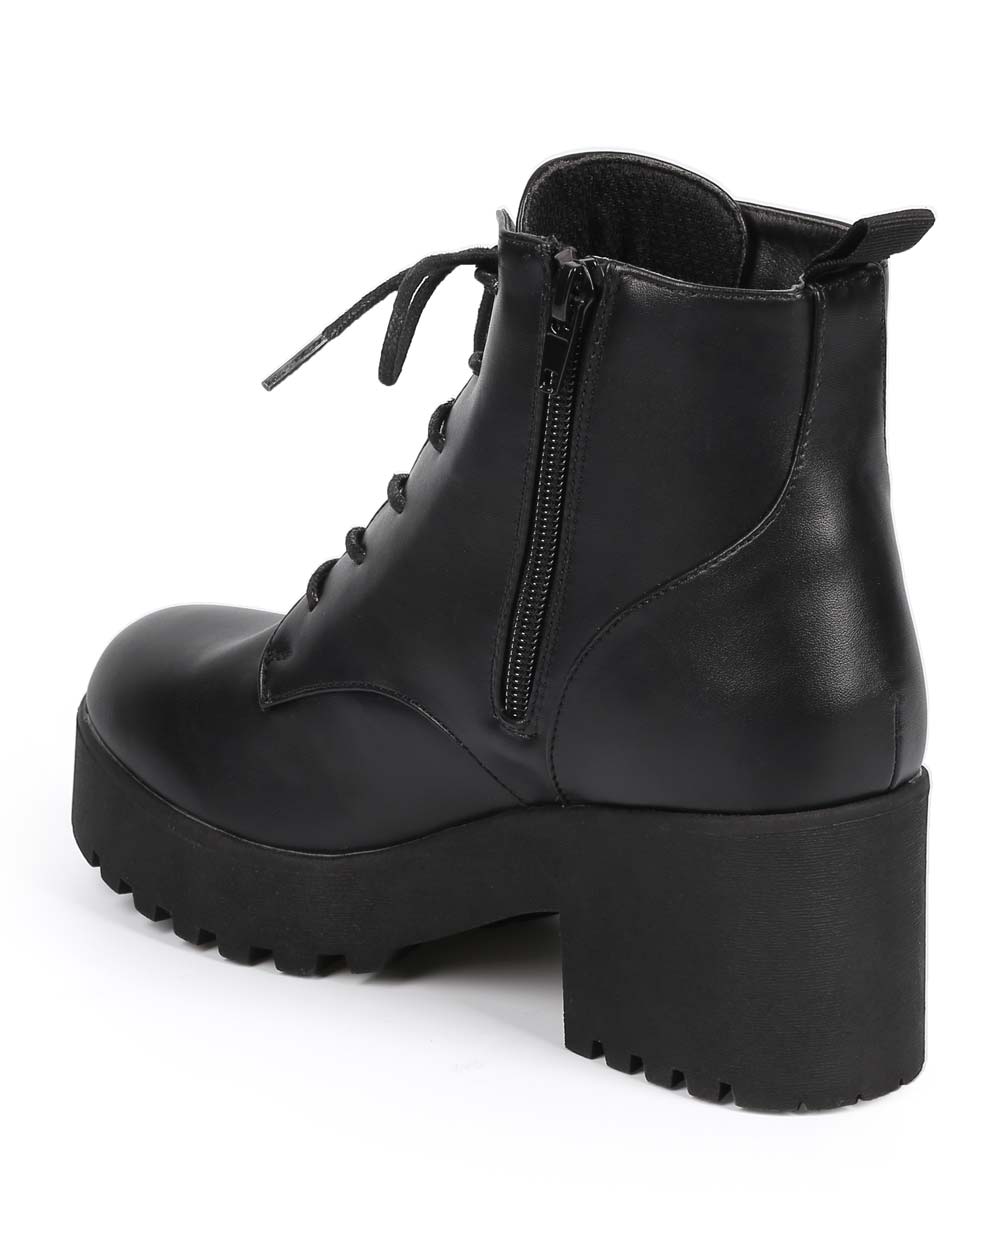 combat boots chunky